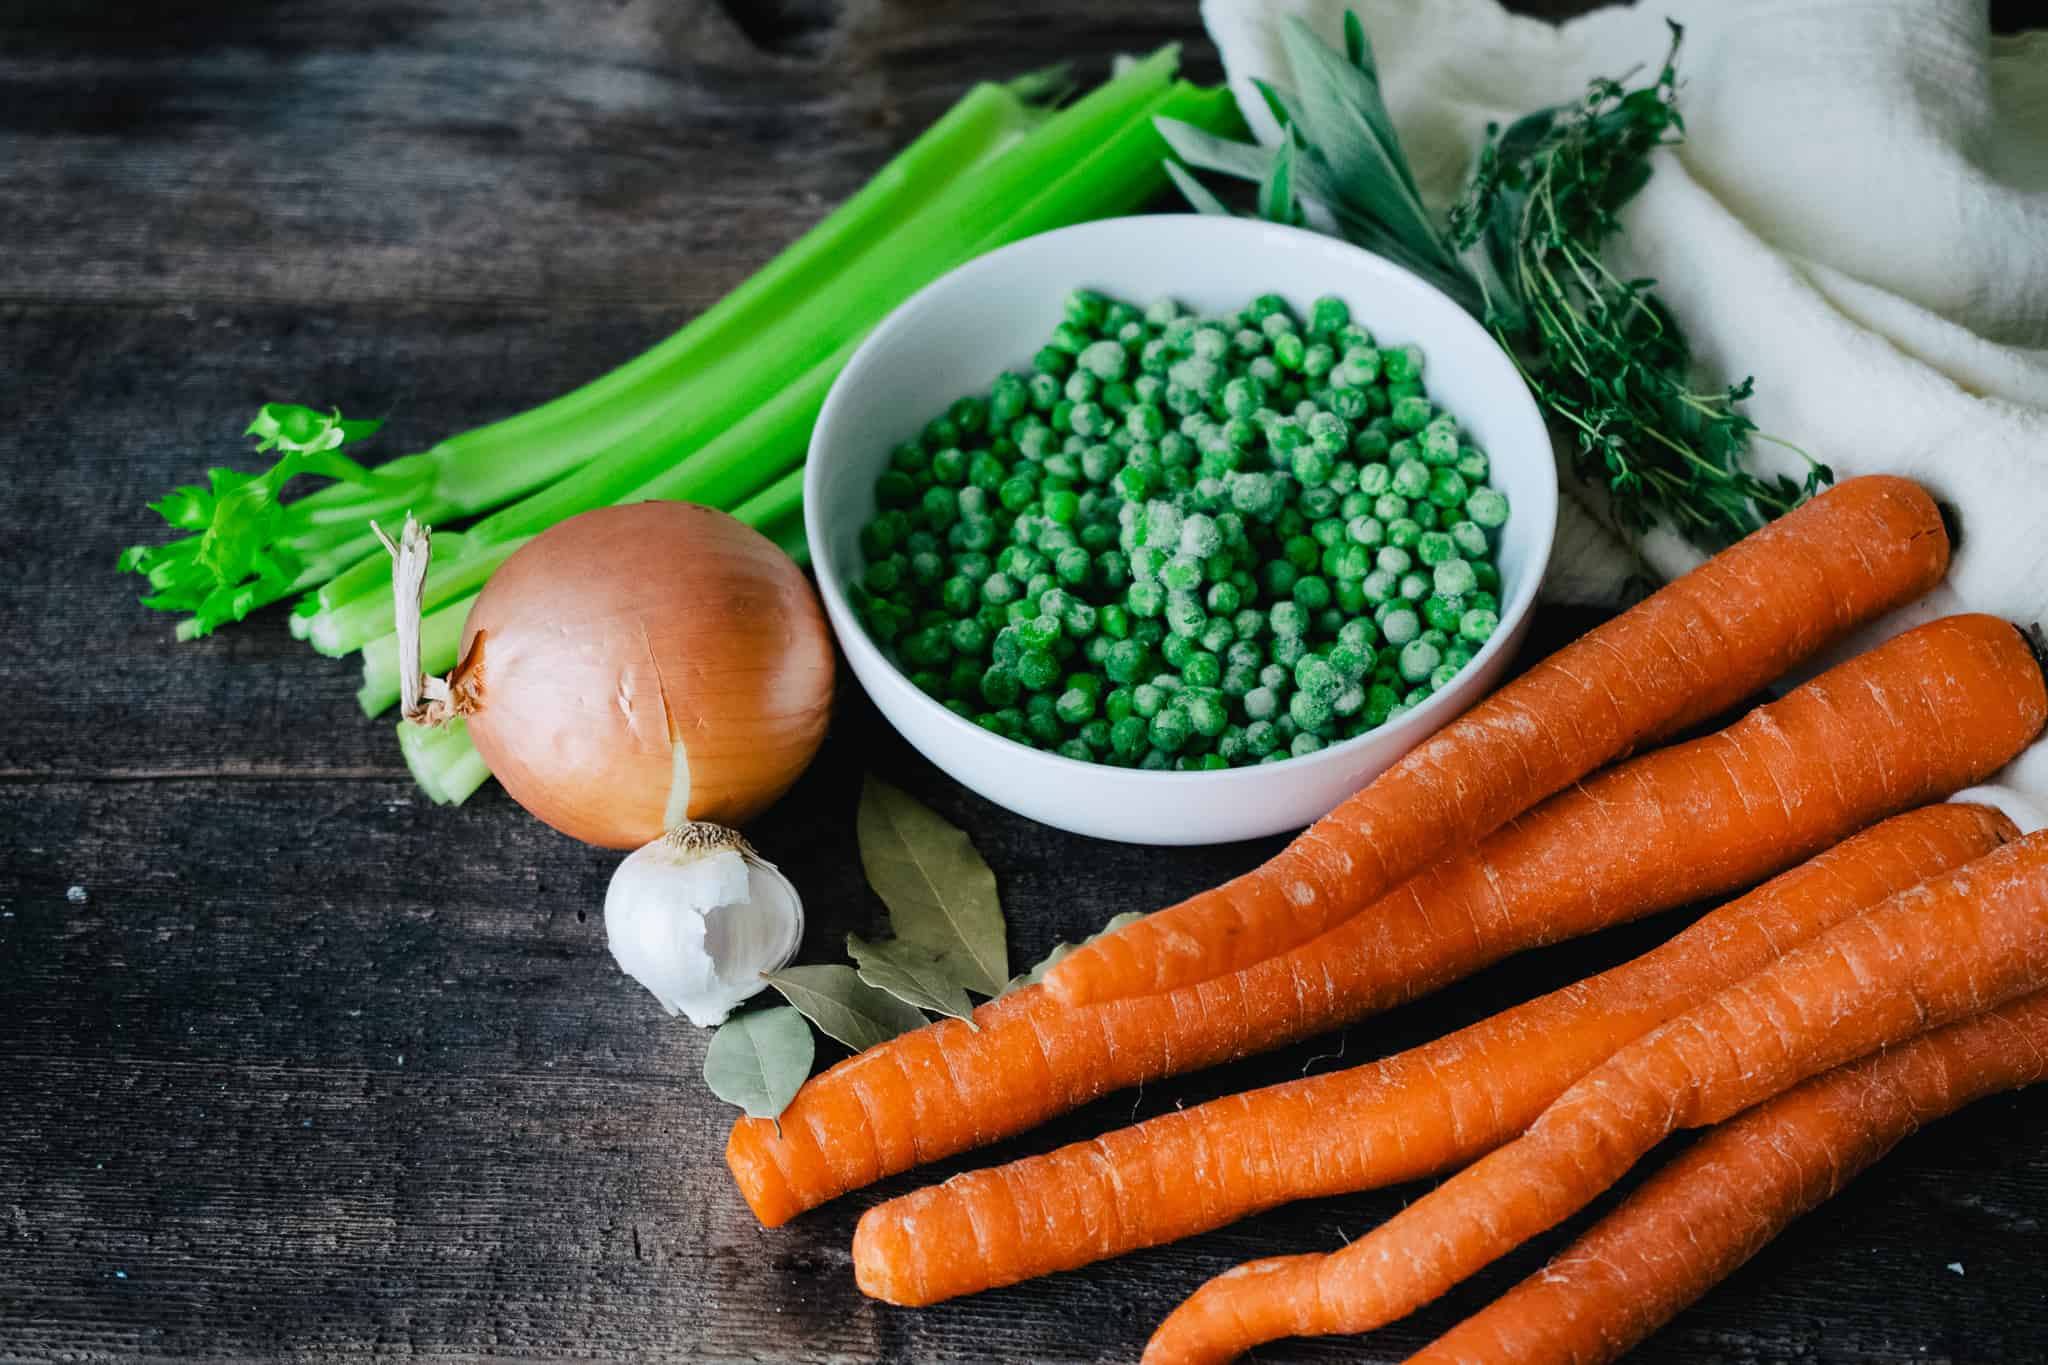 carrots, an onion, garlic cloves, celery and fresh herbs with a white bowl of frozen peas and white kitchen towel on a wooden surface